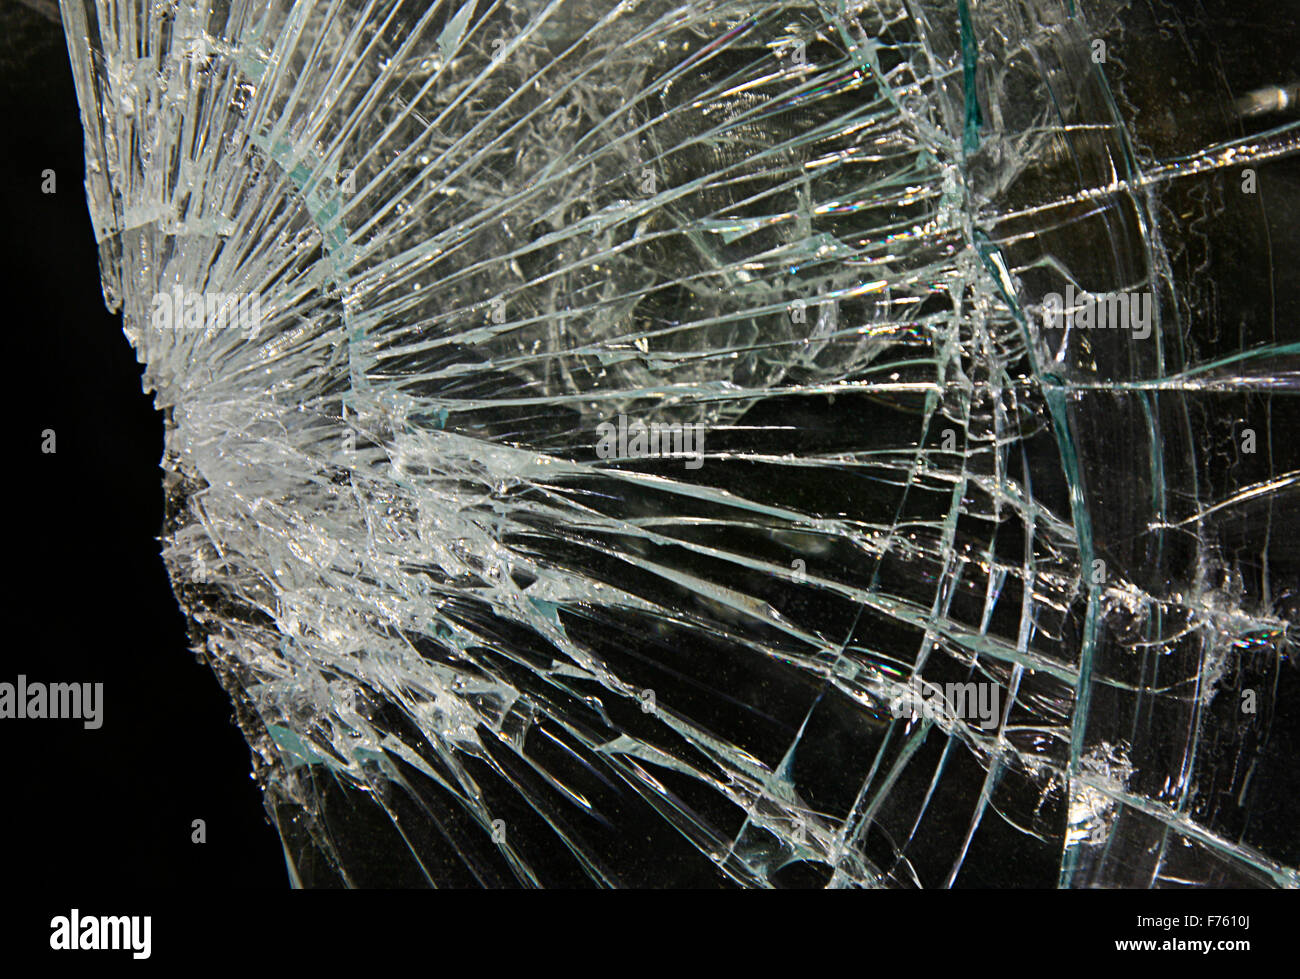 broken or smashed glass on a black background Stock Photo